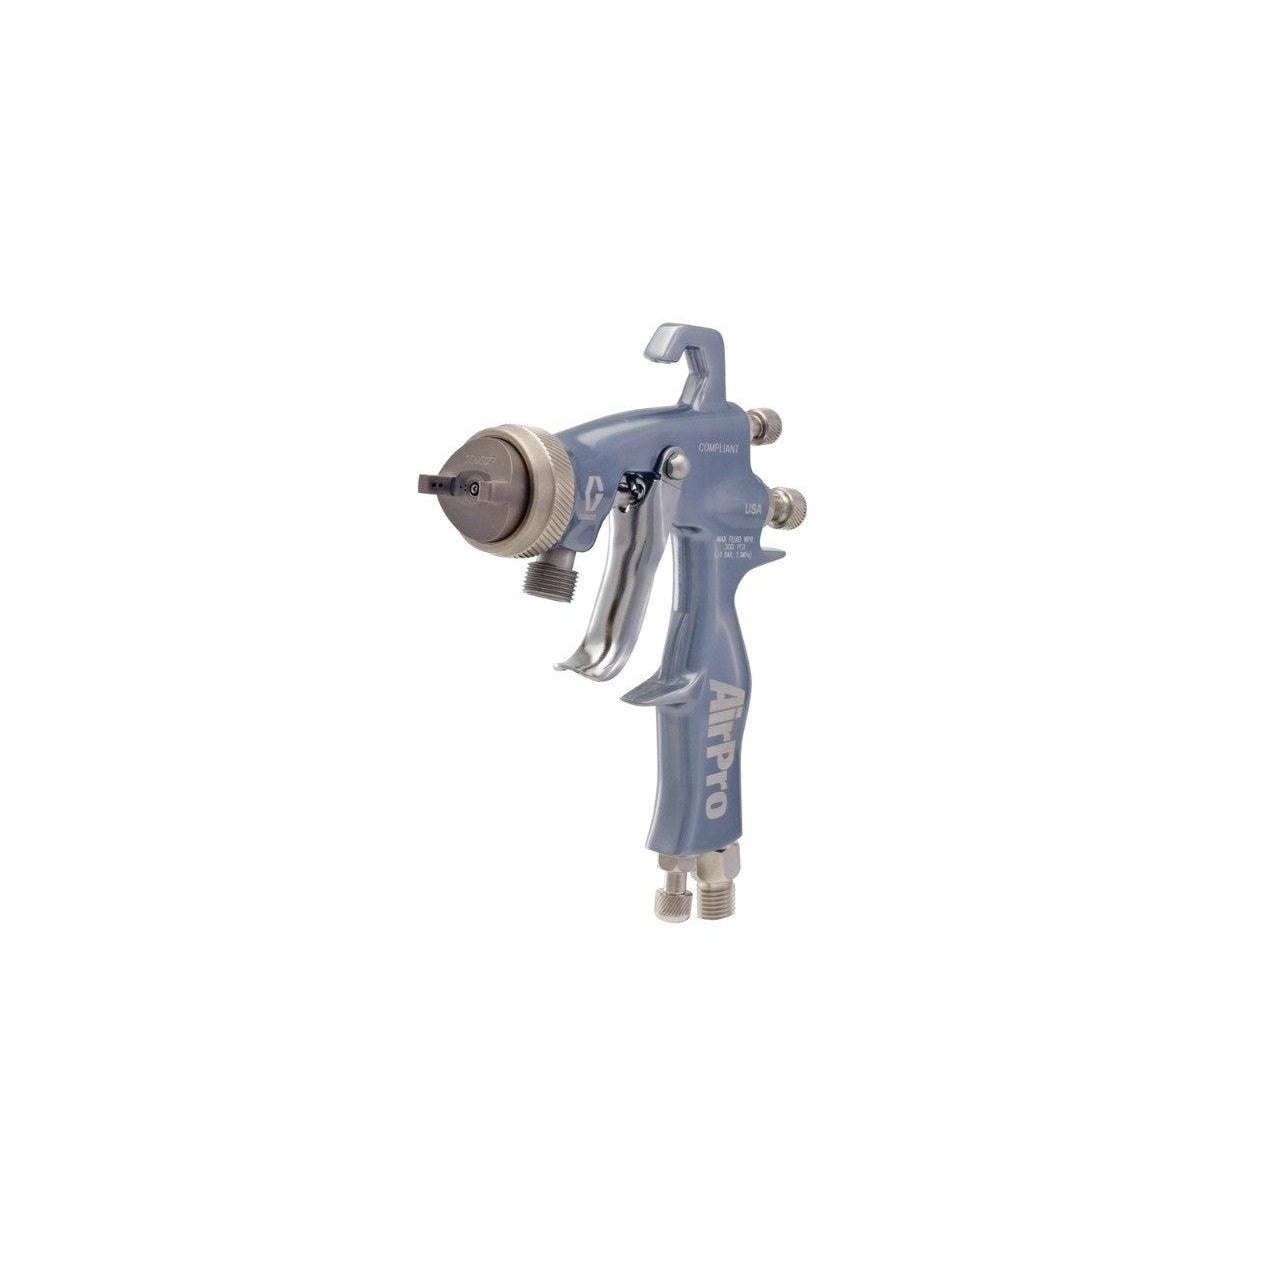 AirPro Air Spray Pressure Feed Gun, Compliant, 0.030 inch (0.8 mm) Nozzle, for Waterborne Applications